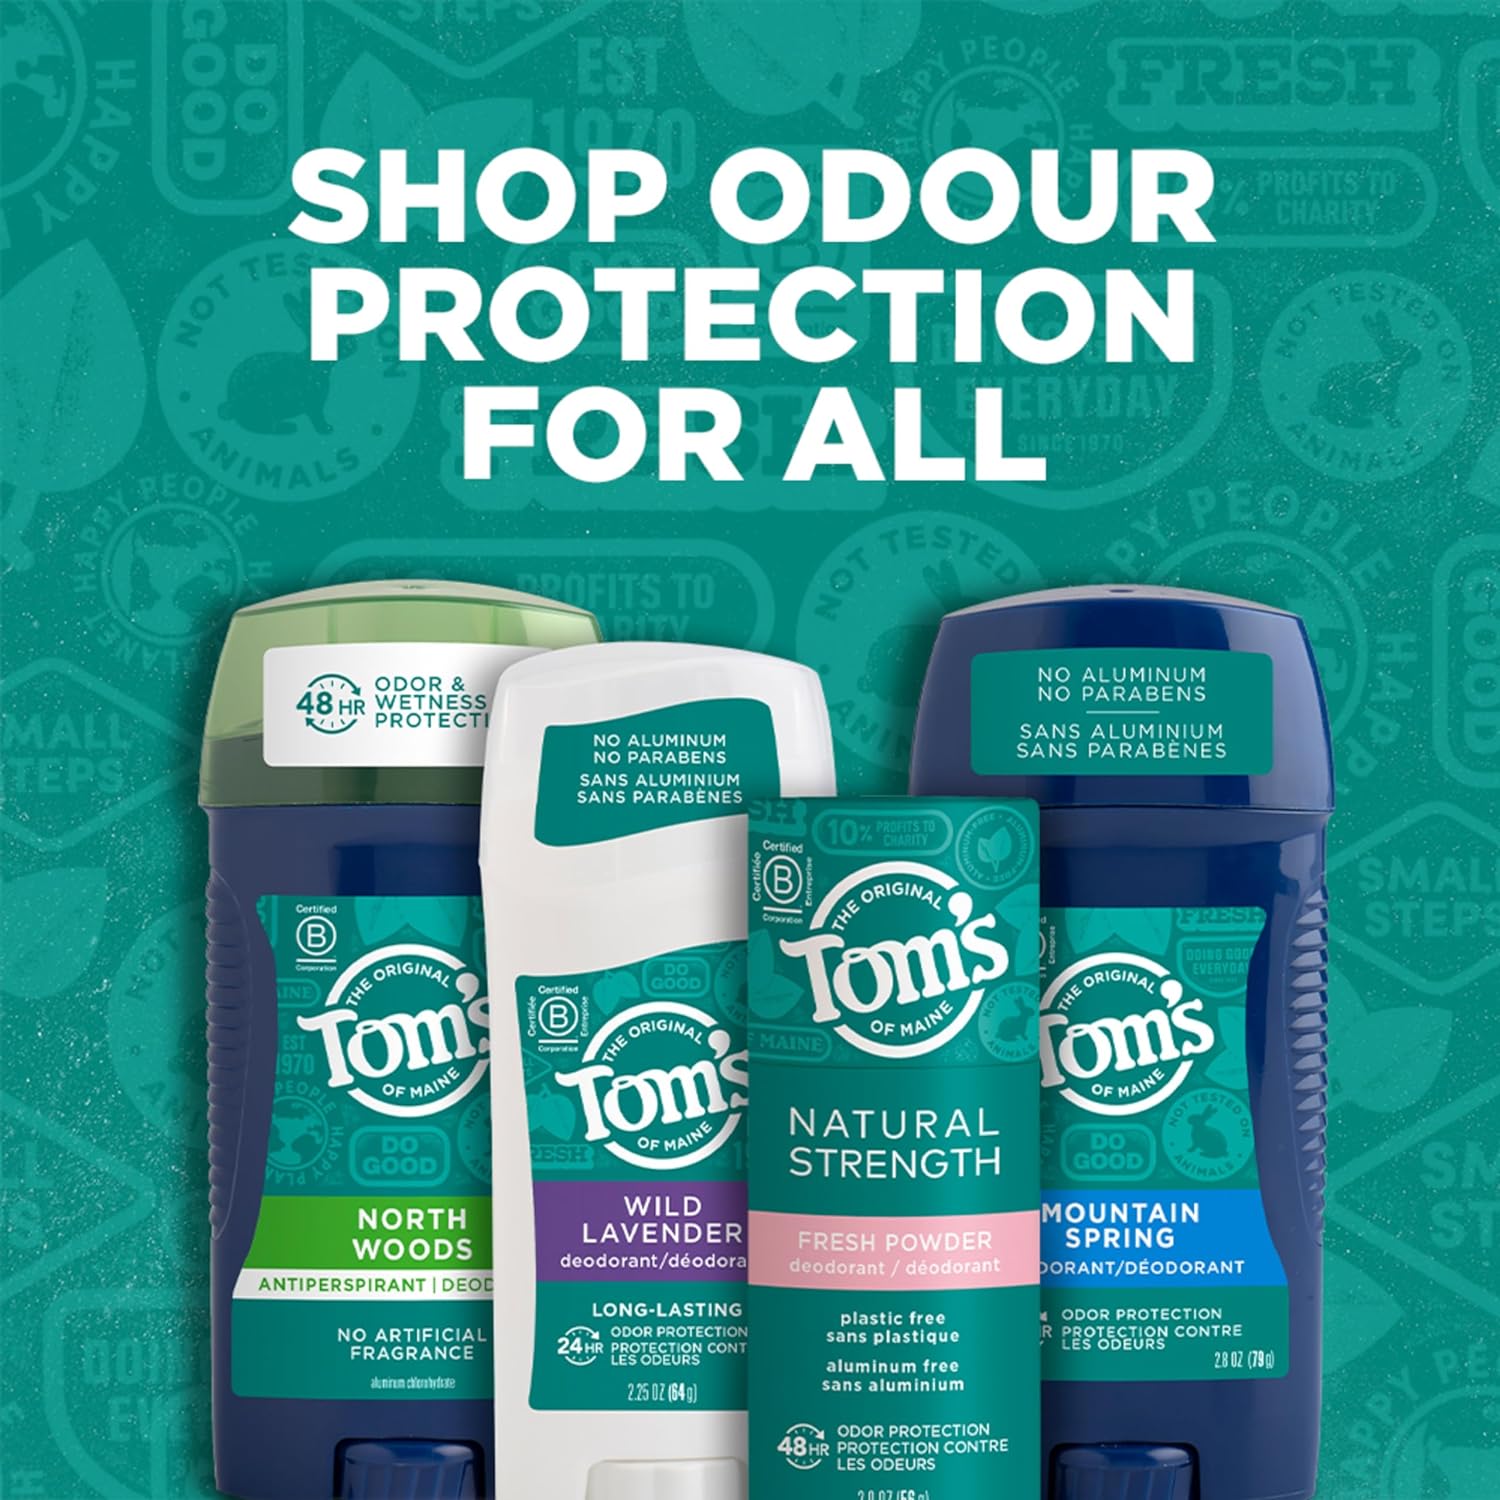 Tom's of Maine Antiperspirant Deodorant for Men, North Woods, 2.8 oz, Pack of 3 (Packaging May Vary) : Beauty & Personal Care